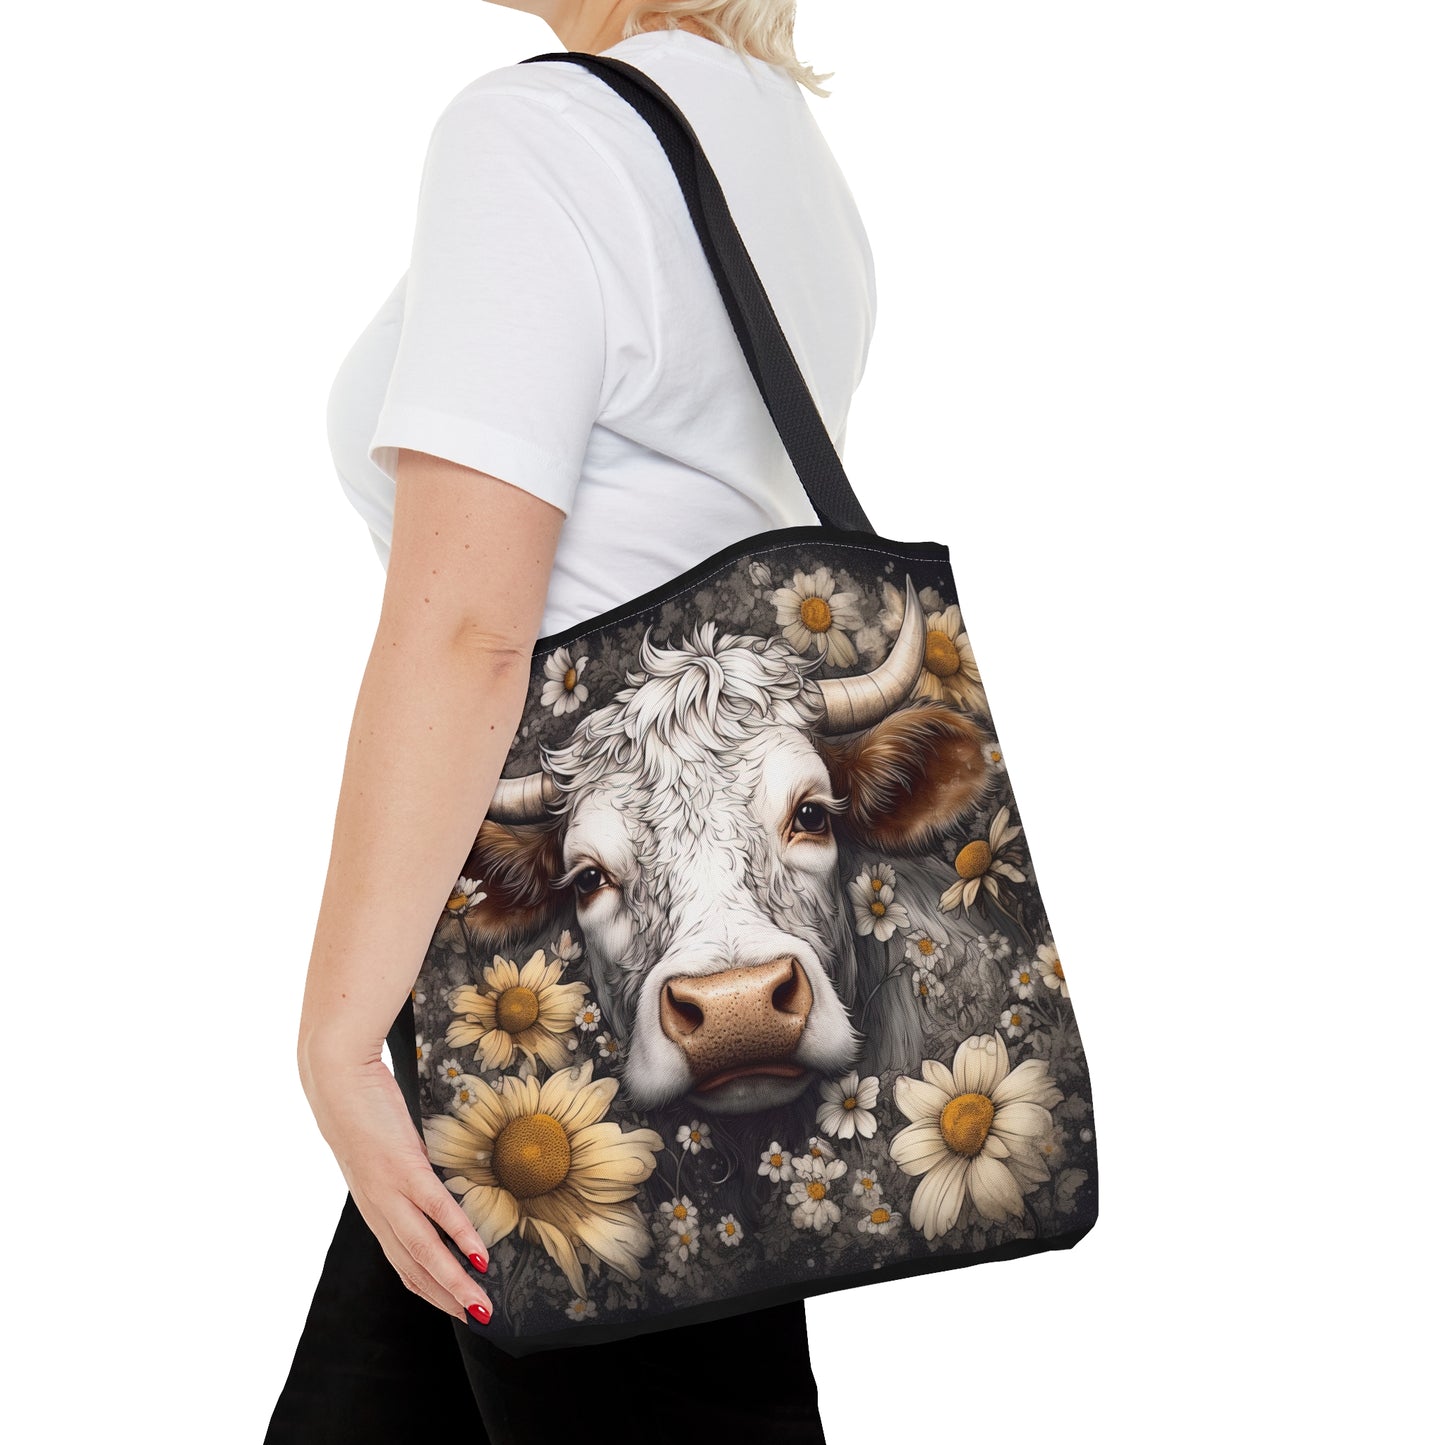 Highland Cow Tote Bag